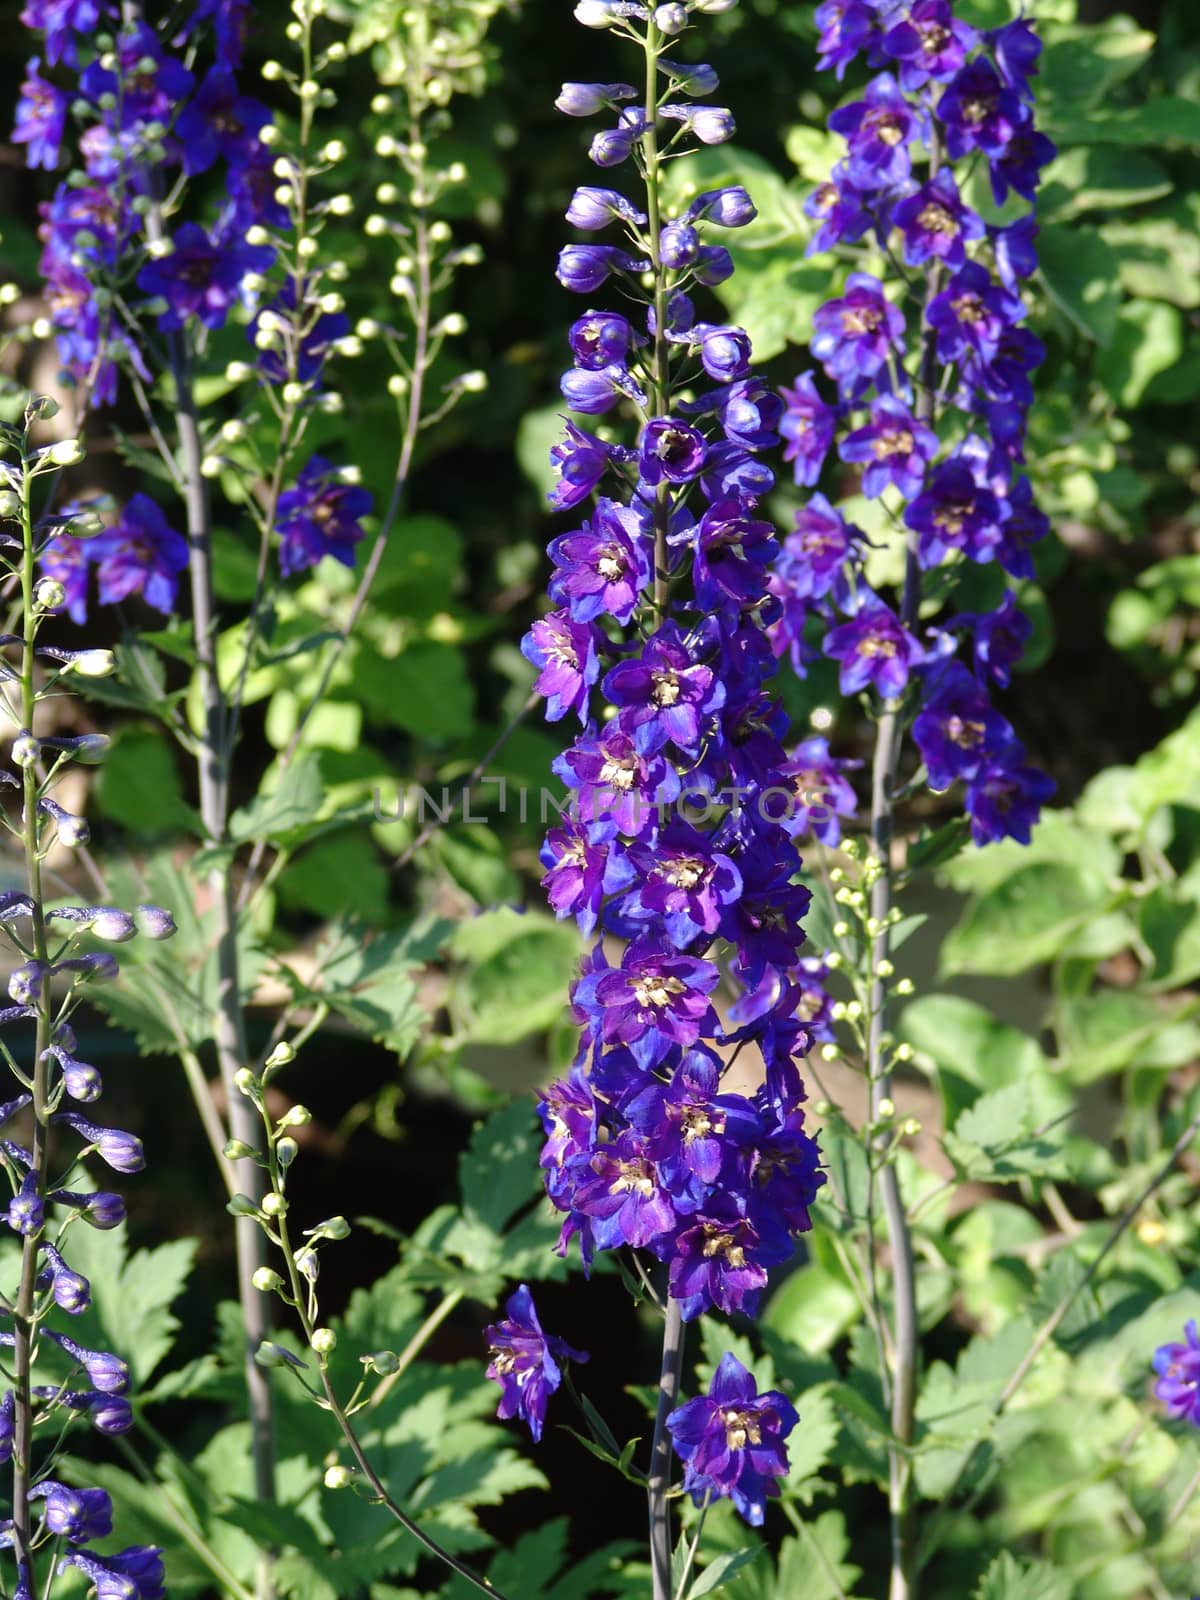 Delphinium,Candle Delphinium,many beautiful purple  flowers blooming in the garden.